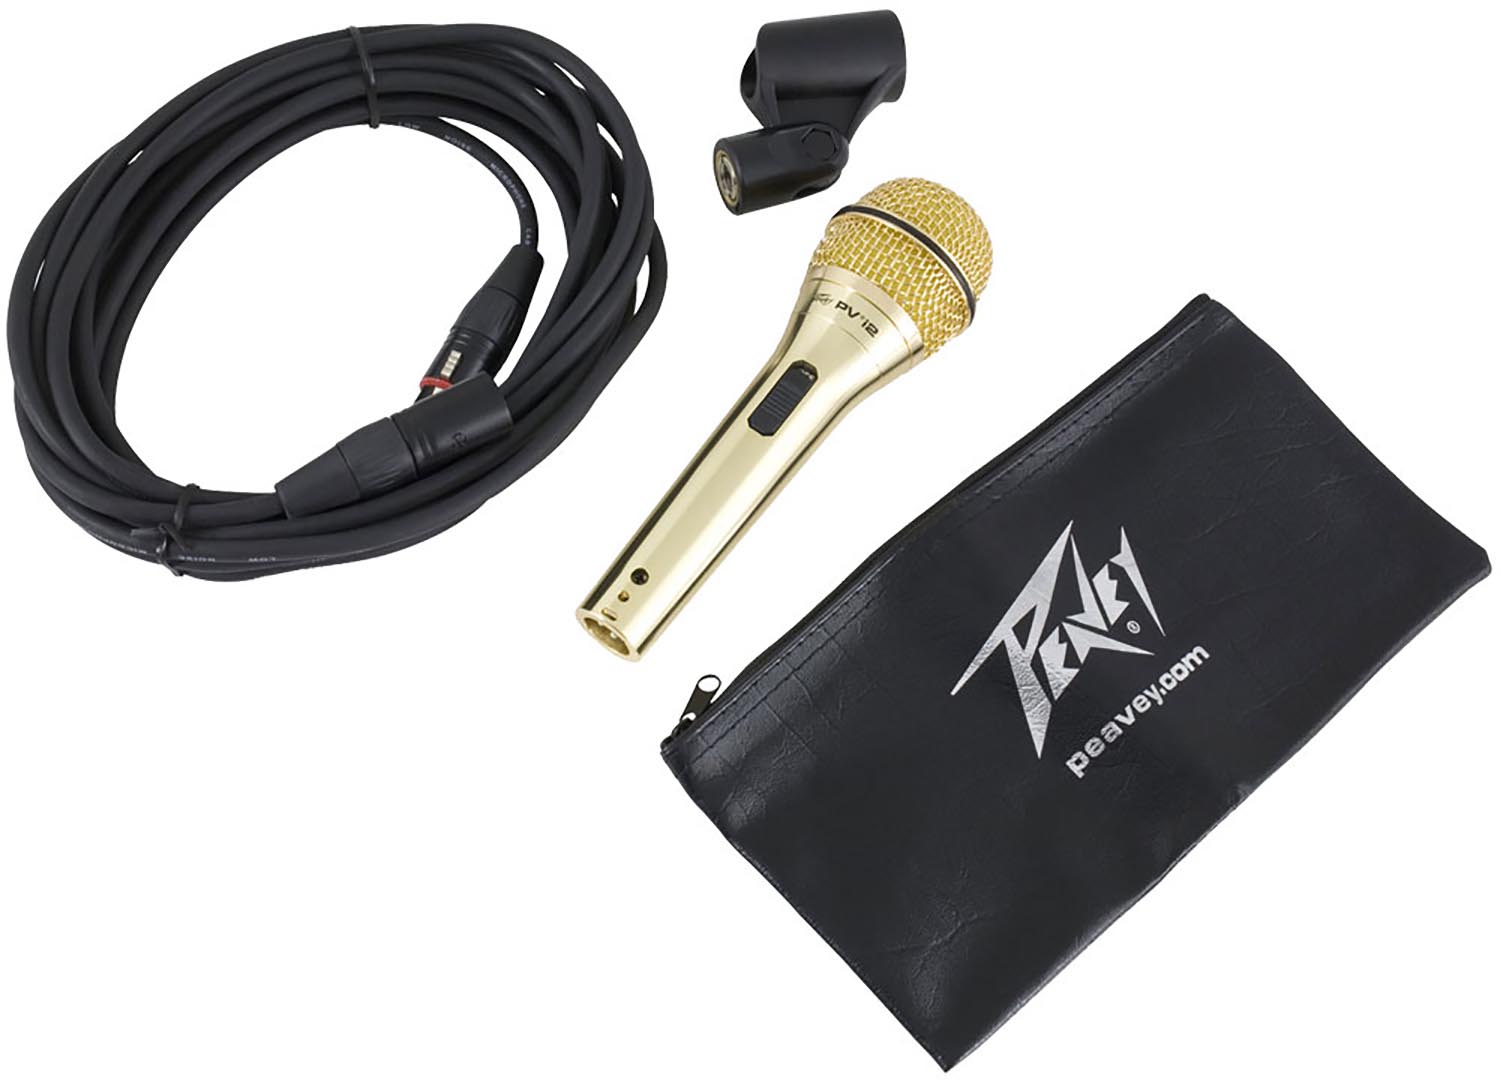 Open Box: Peavey PVI 2G Cardioid Unidirectional Dynamic Vocal Microphone with XLR Cable - Gold - Hollywood DJ